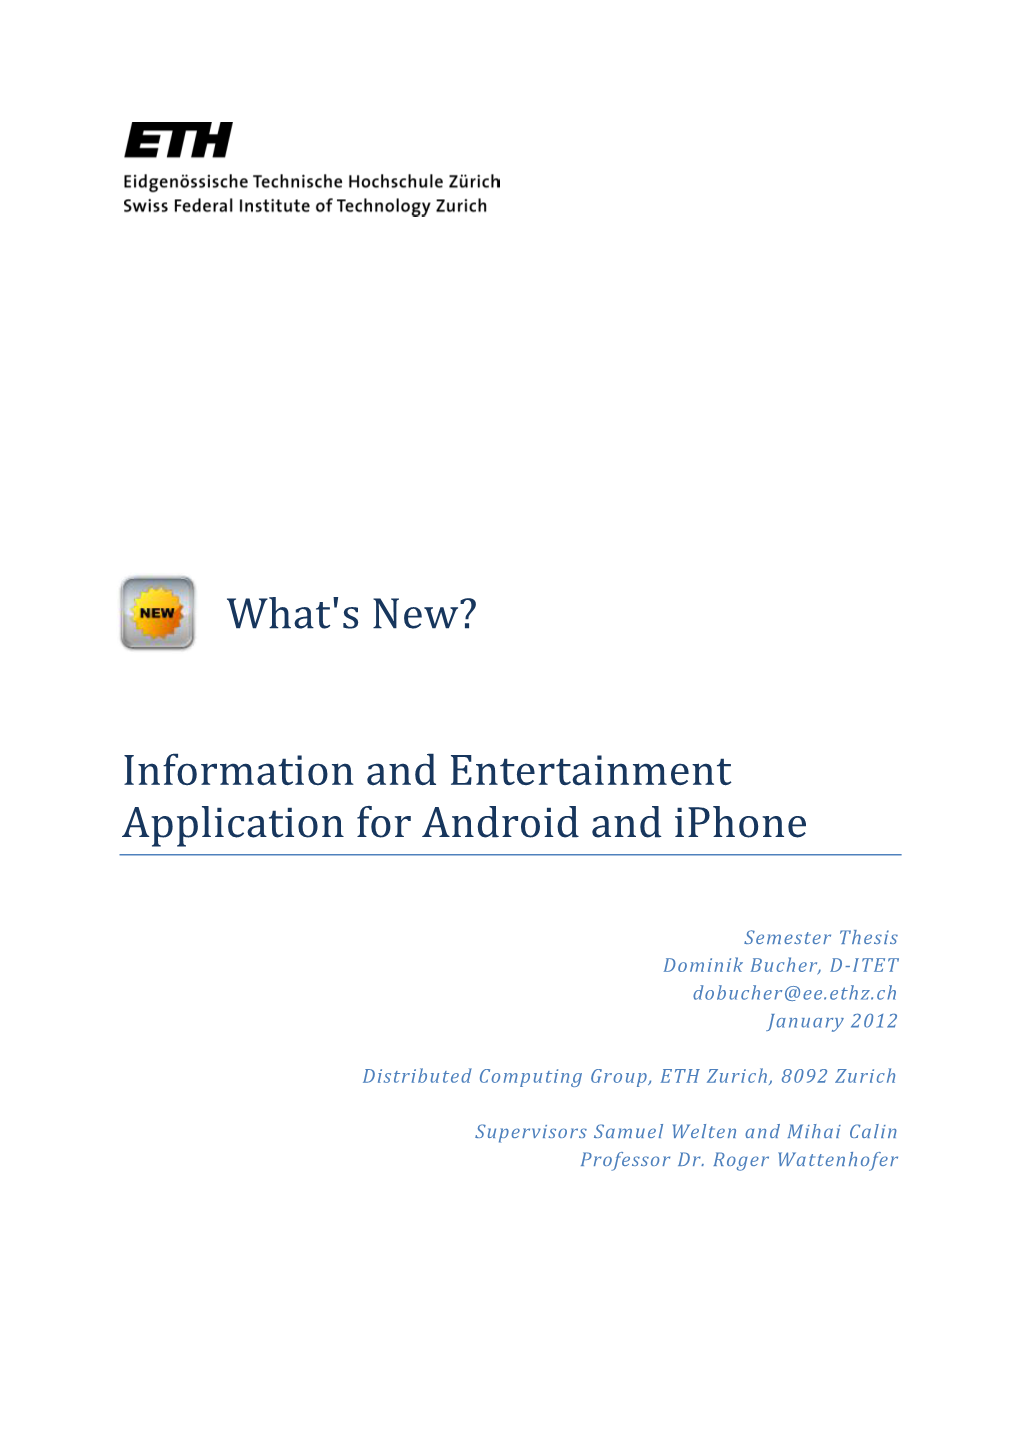 What's New? Information and Entertainment Application For